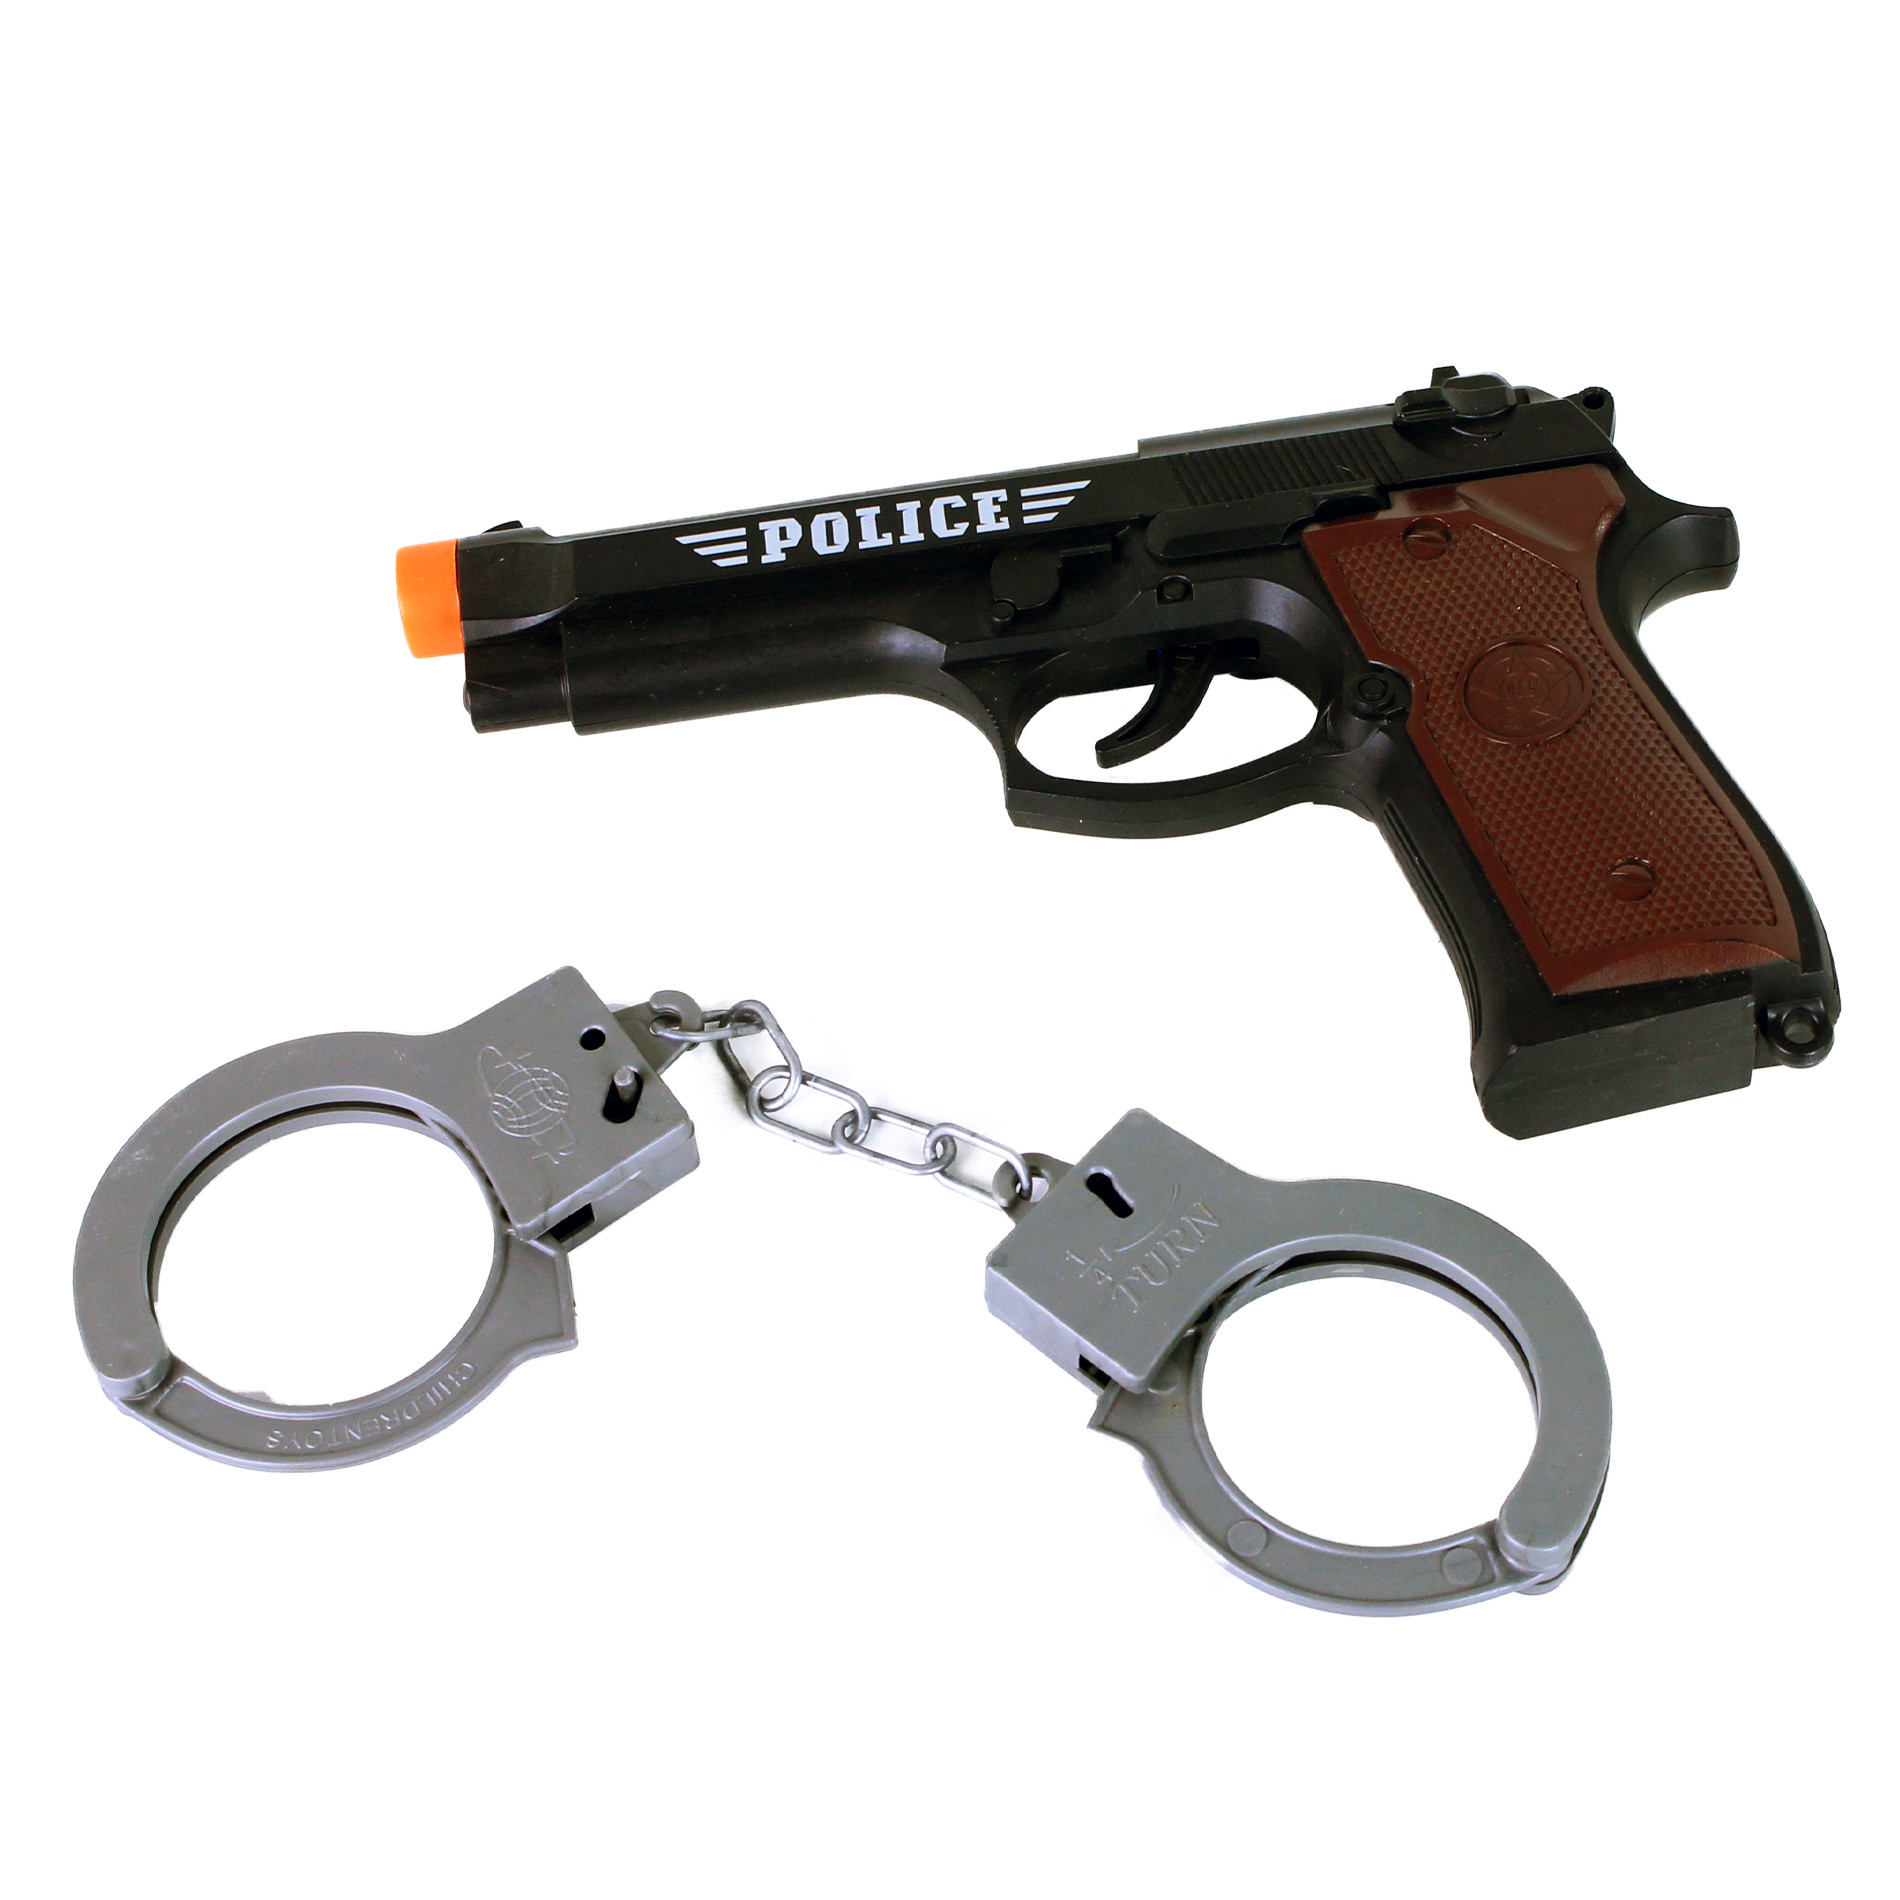 Police pistol and handcuffs with sound